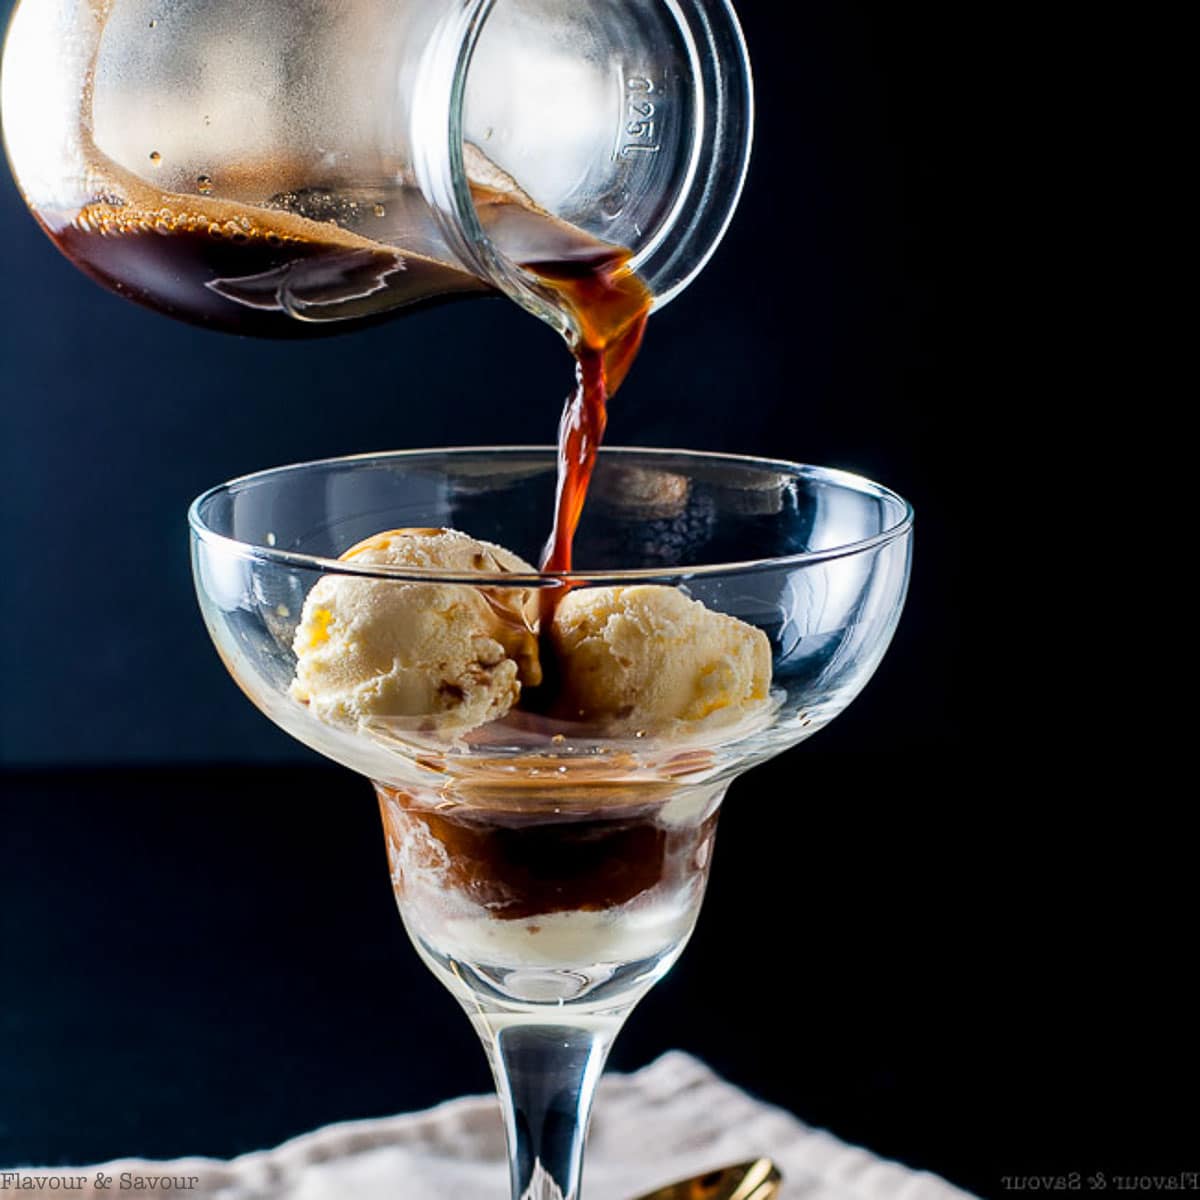 How to Make an Affogato Coffee Dessert from https://www.flavourandsavour.com/